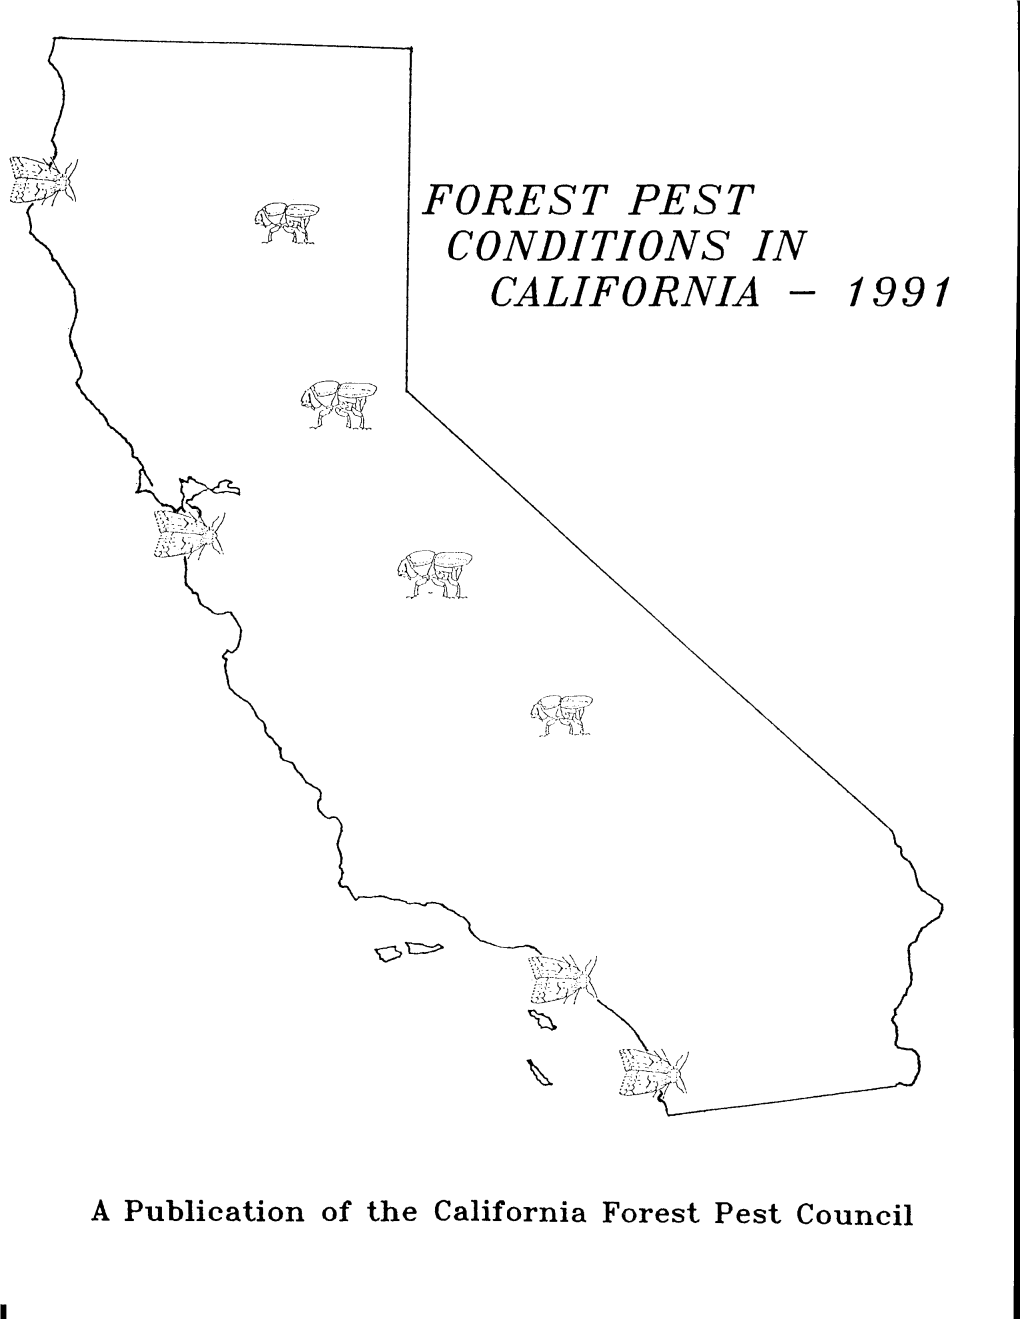 Forest Pest Conditions in California, 1991